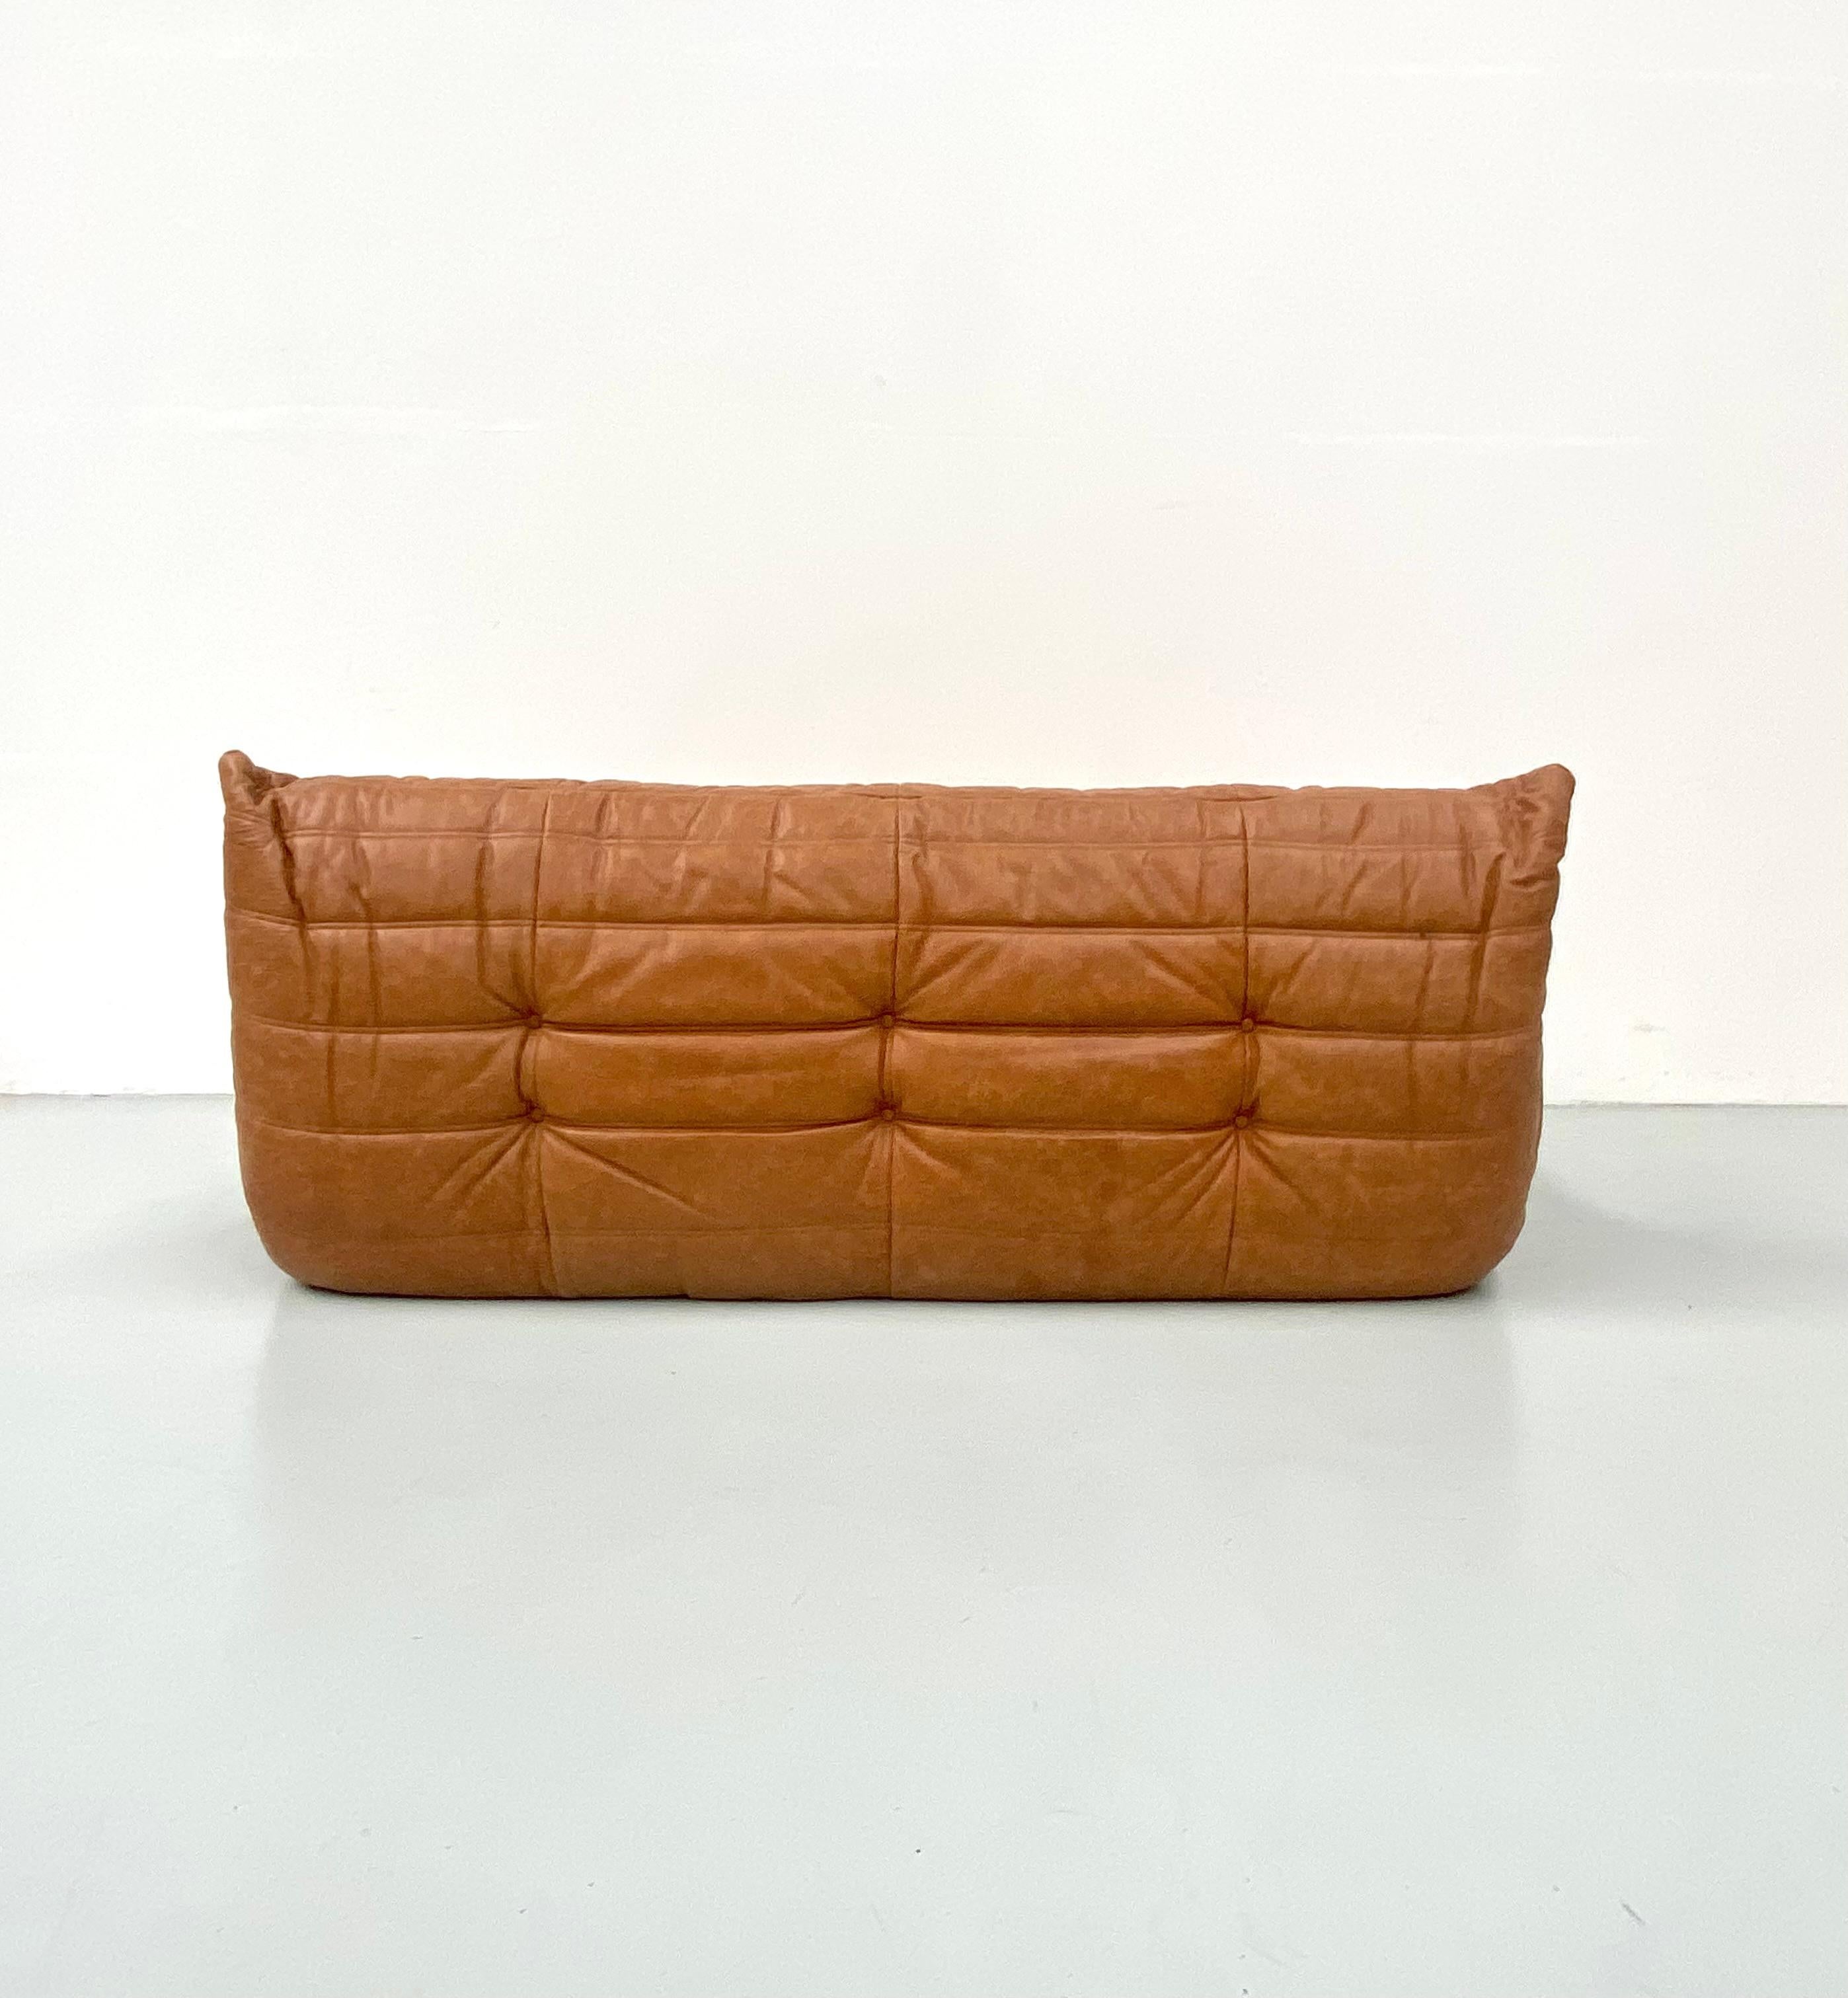 French Togo Sofa in Vintage Cognac Leather by M. Ducaroy for Ligne Roset, 1970s 4